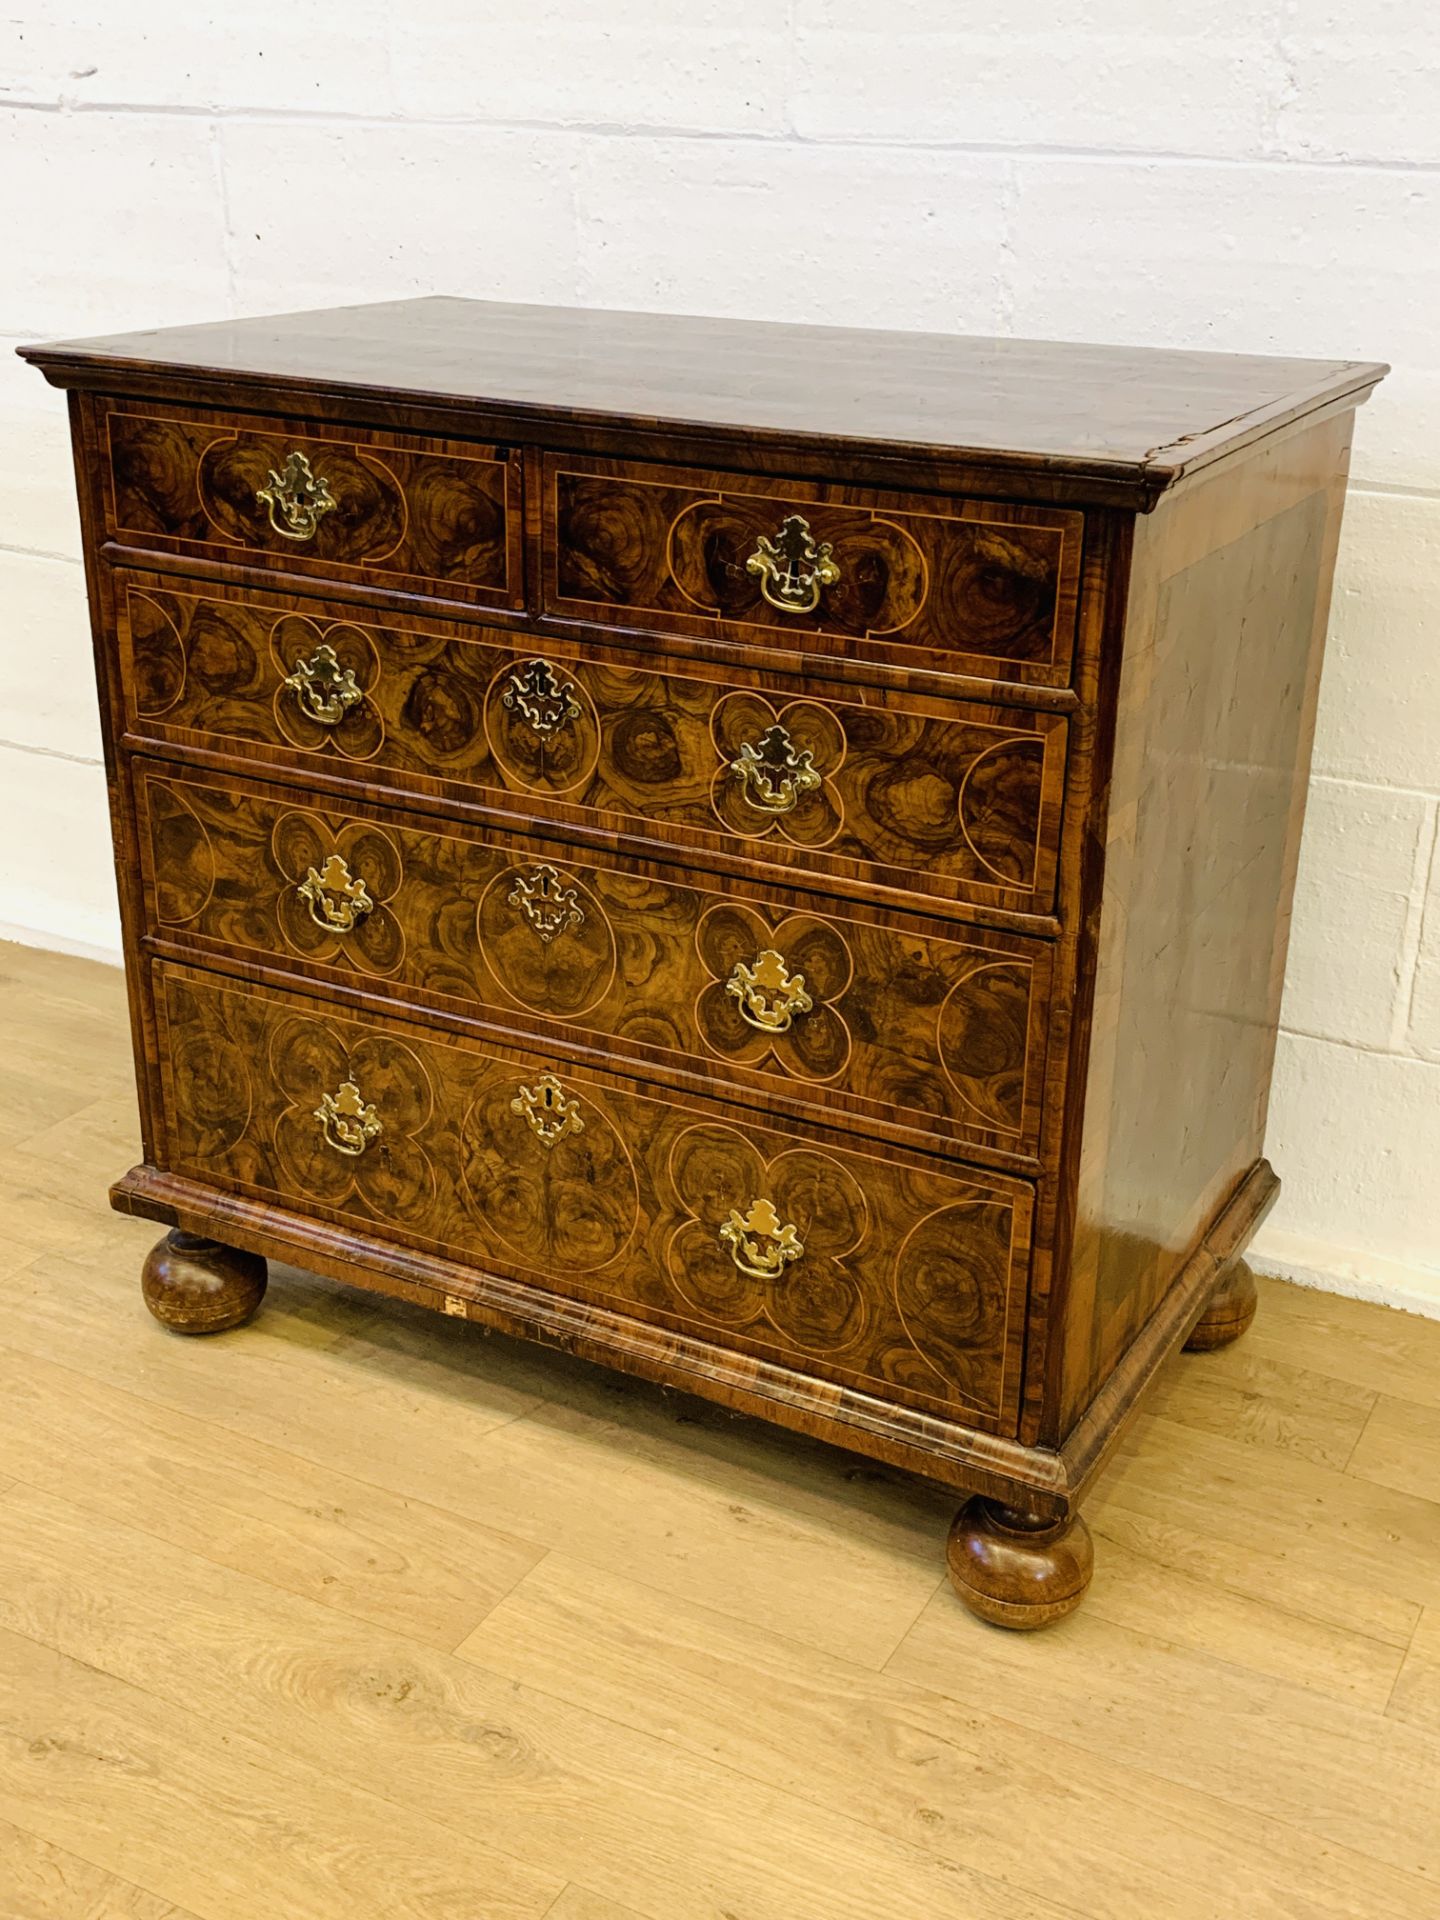 William and Mary period chest of drawers - Image 3 of 11